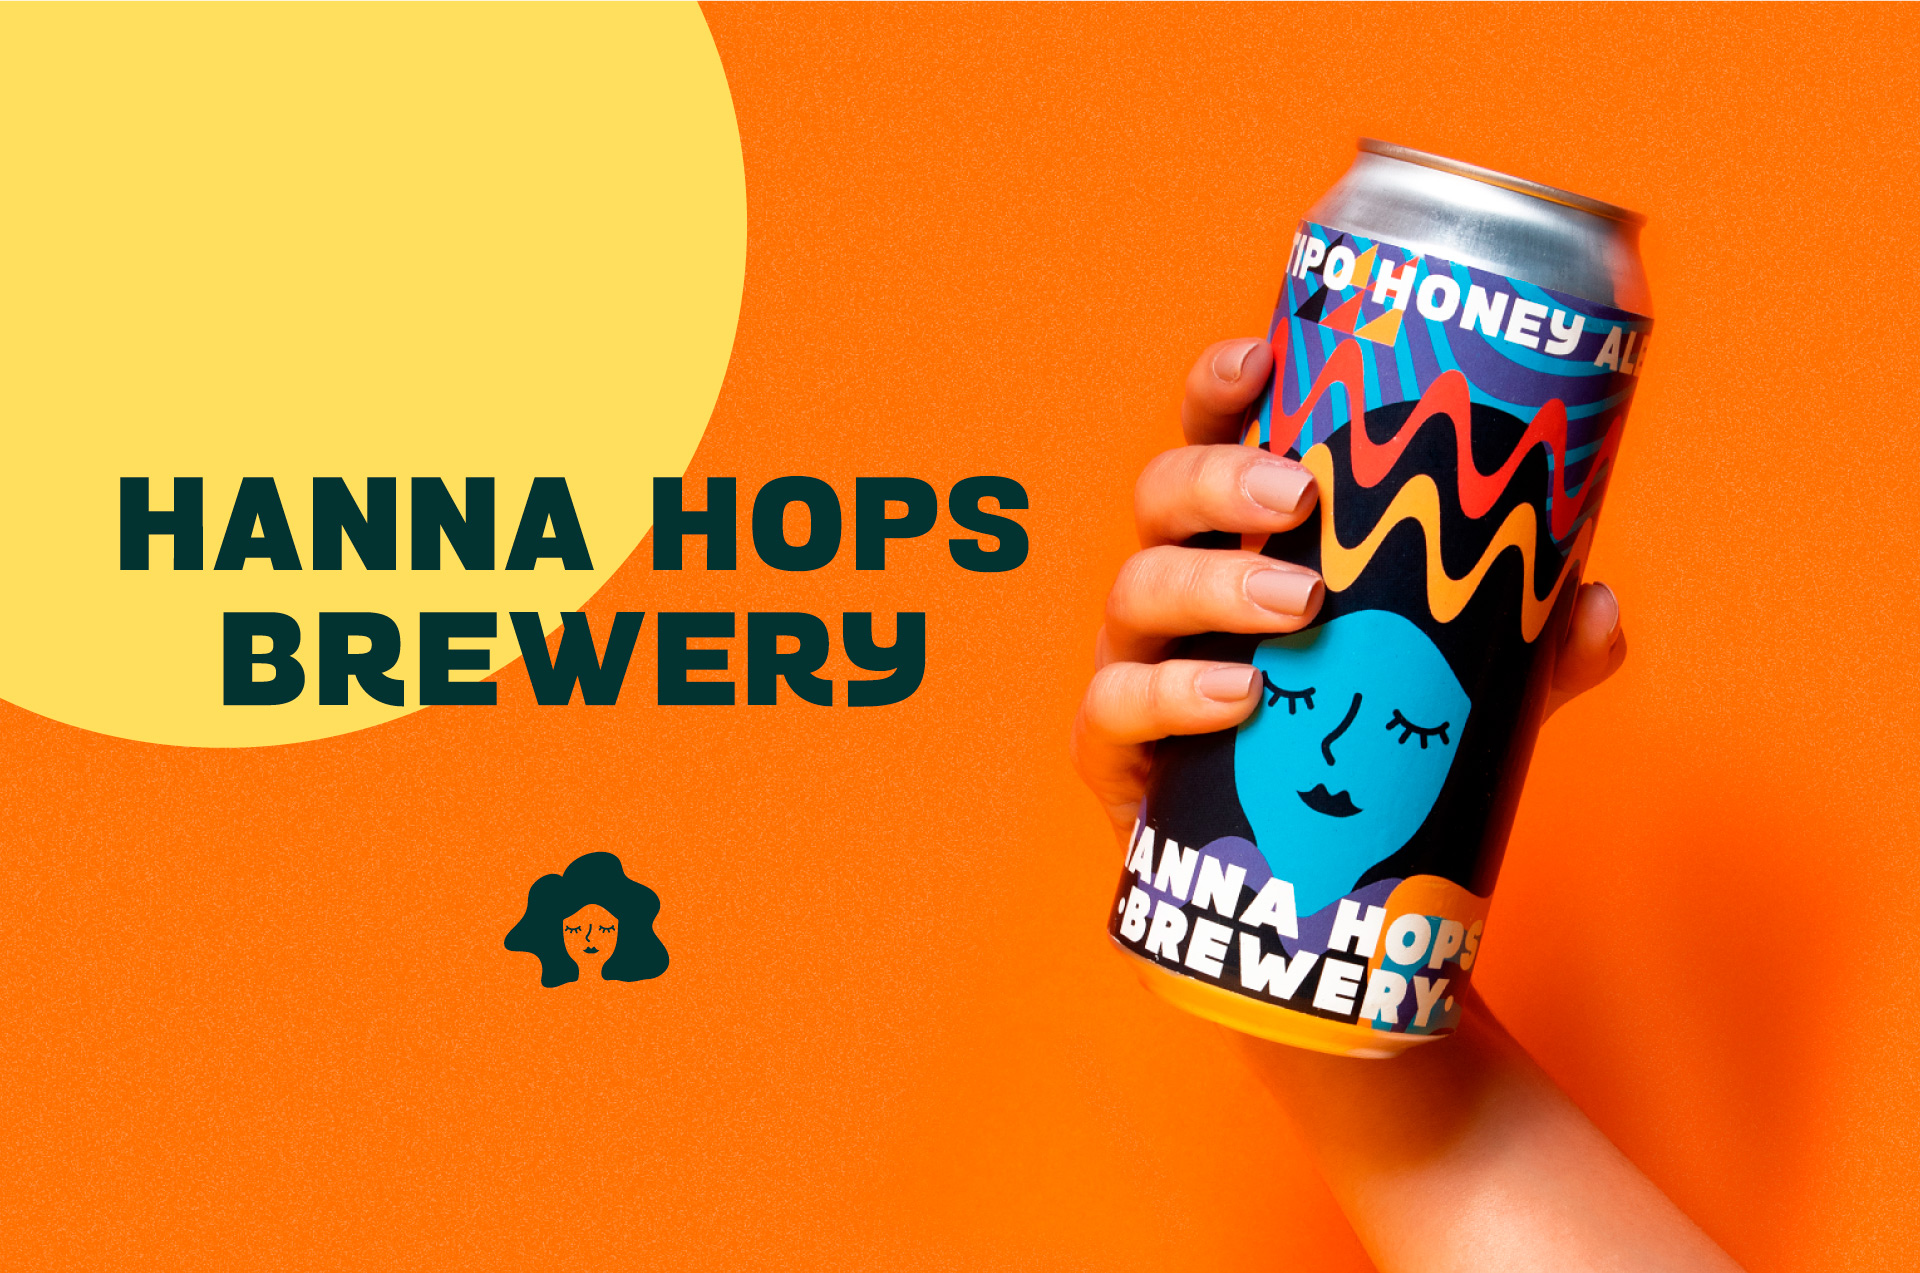 Hanna Hops Brewery Designed by Mellow & Banana